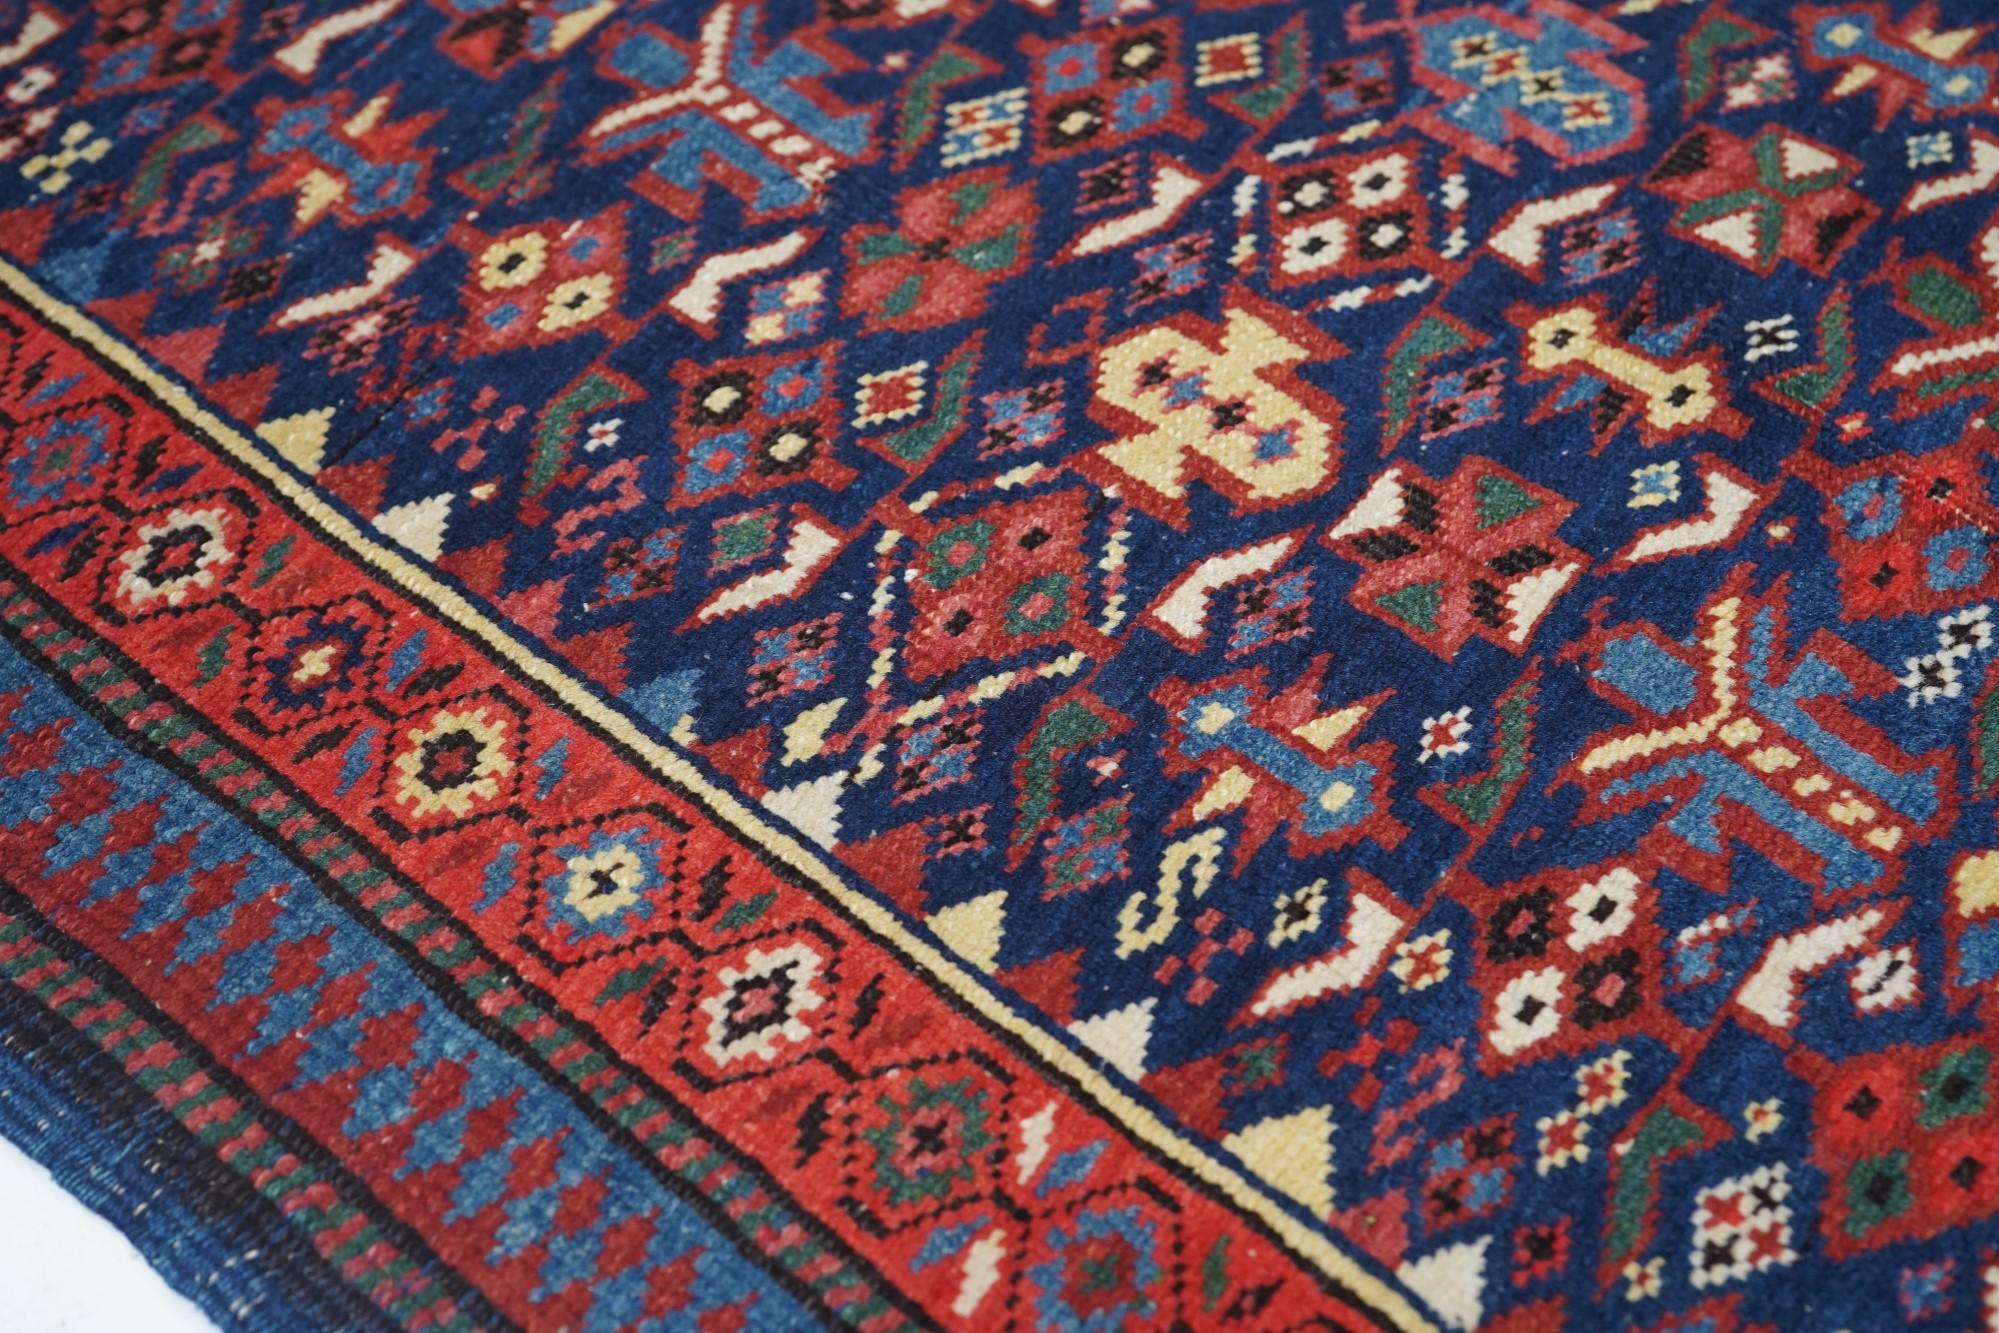 Antique Shirvan-Kuba Rug 3'6'' x 5'5'' In Excellent Condition For Sale In New York, NY